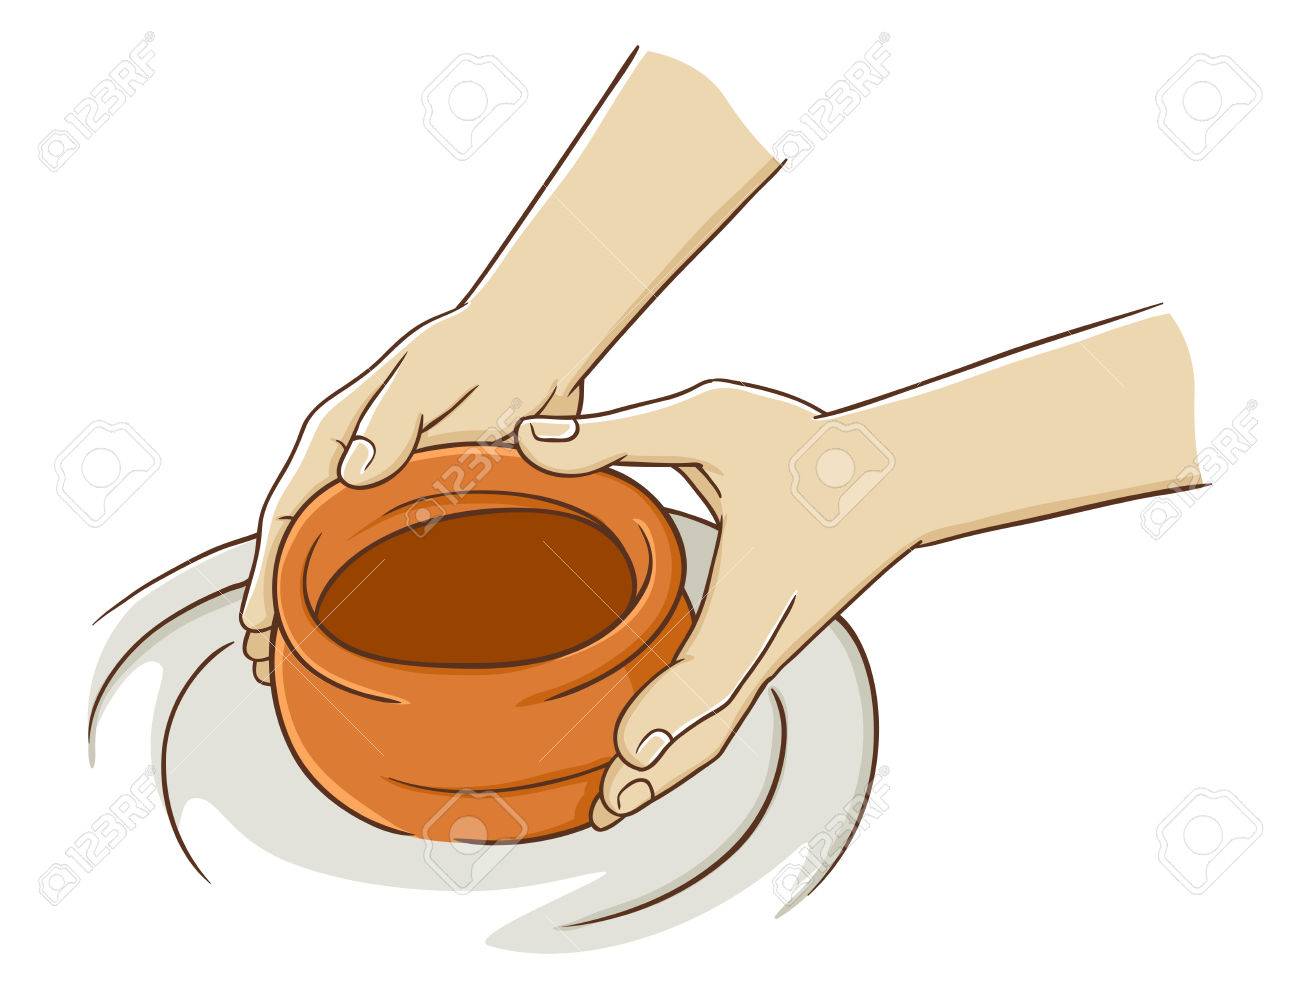 Hand Making Pottery From Clay » Clipart Station.